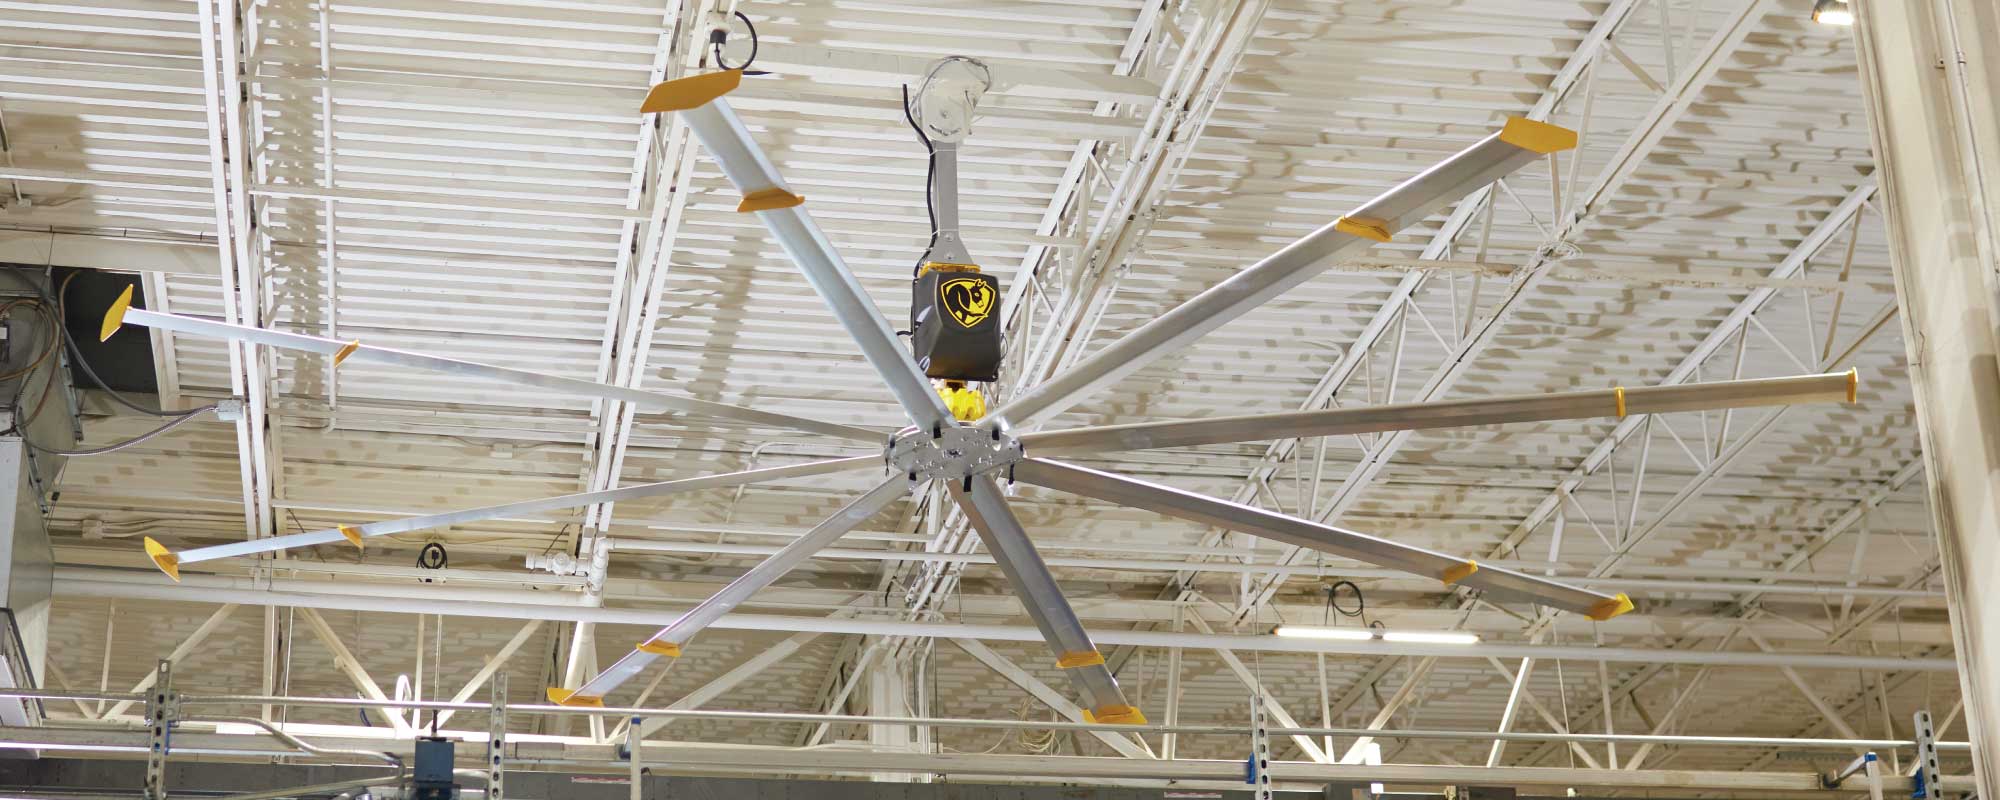 high volume industrial ceiling fans